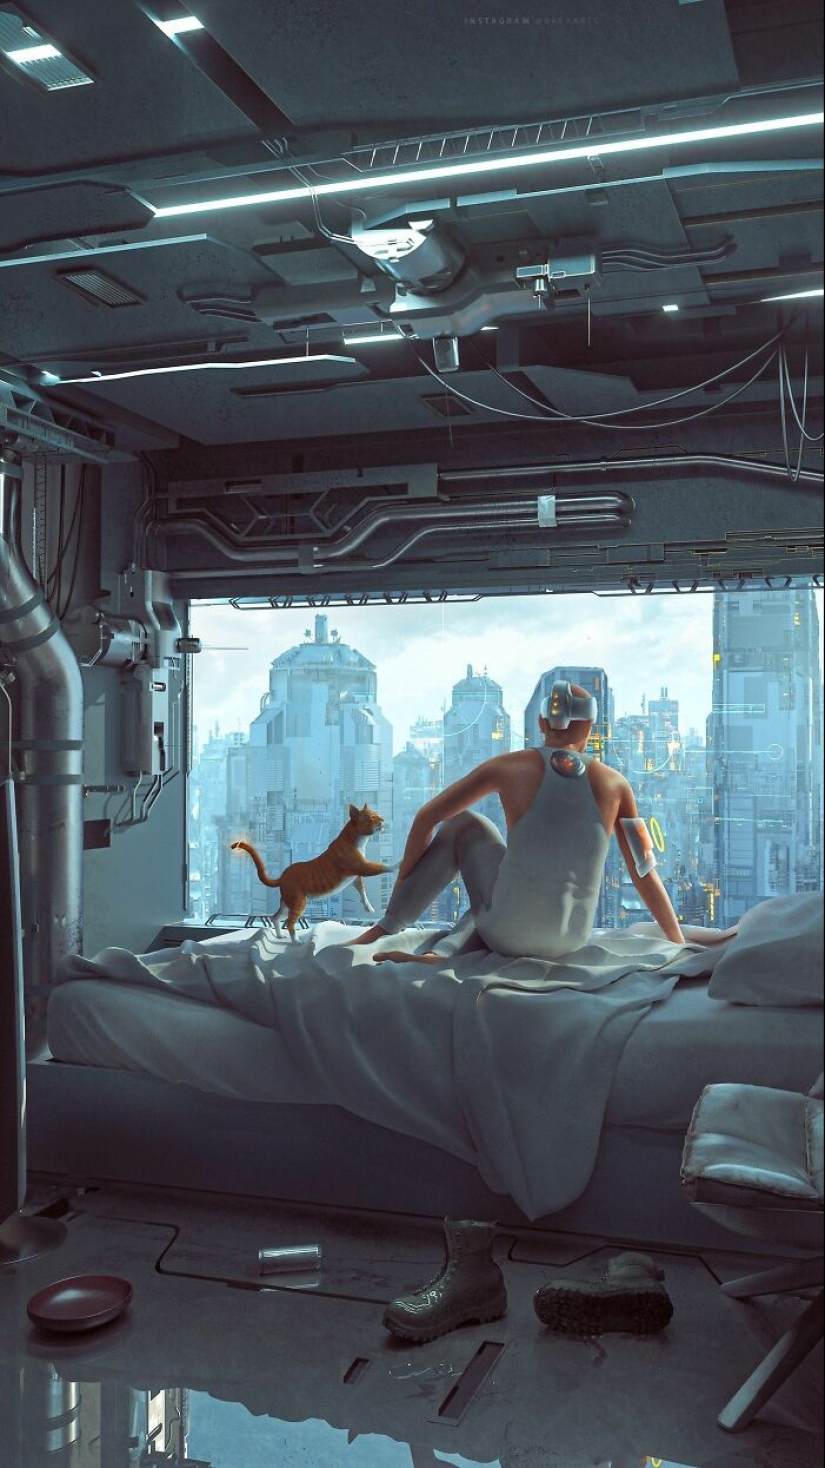 12 Artworks Of How People Imagine The Future, As Shared In This Online Community